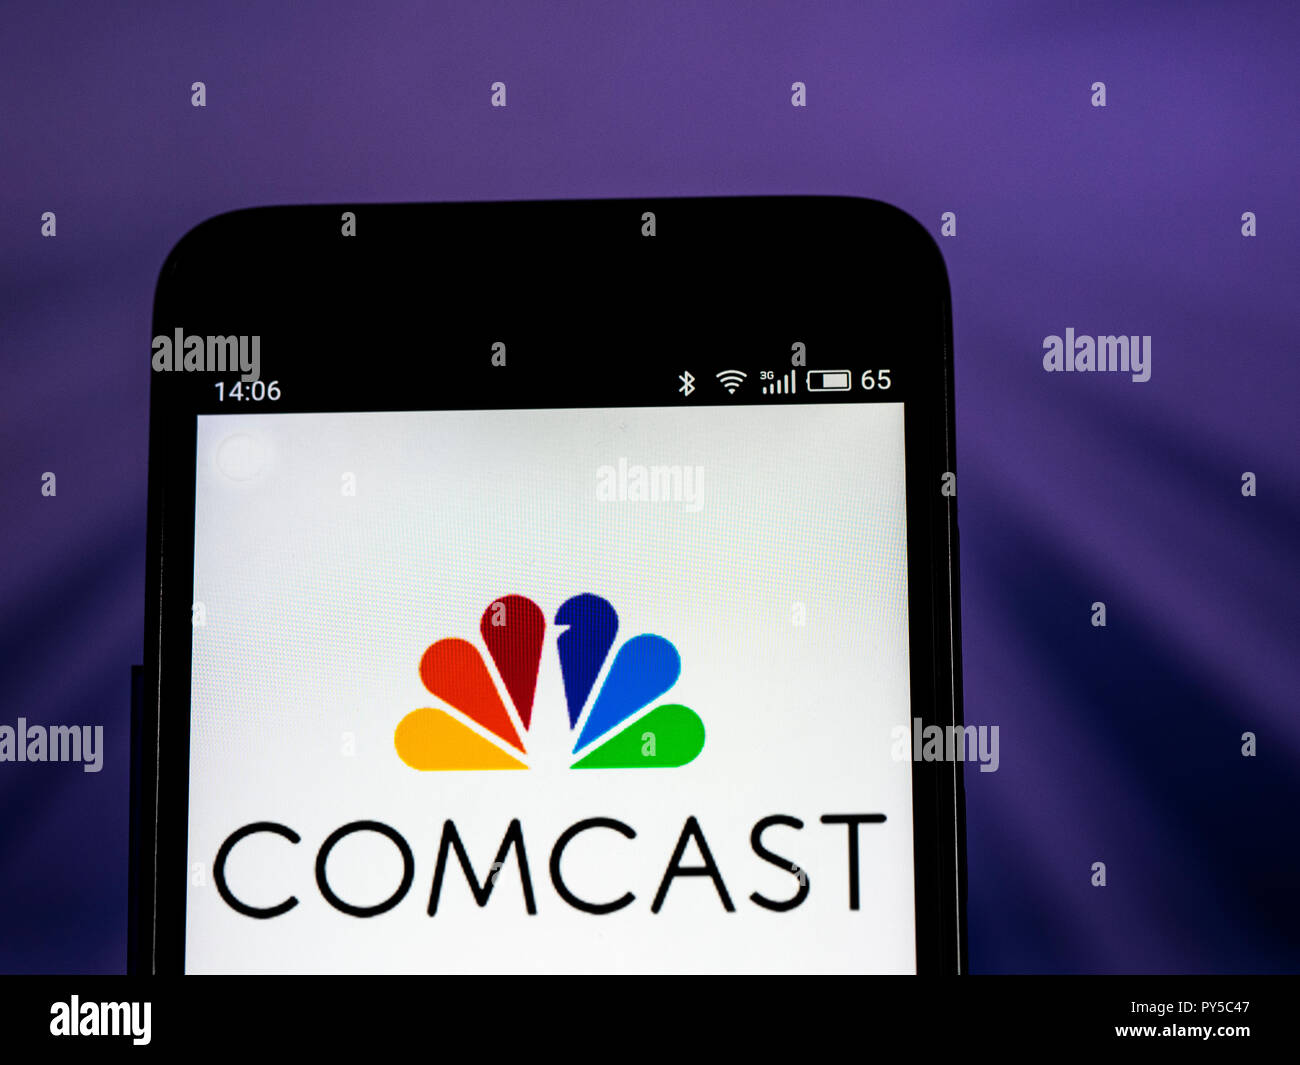 Comcast Telecommunications company logo seen displayed on smart phone. Comcast Corporation is an American global telecommunications conglomerate headquartered in Philadelphia, Pennsylvania. Stock Photo